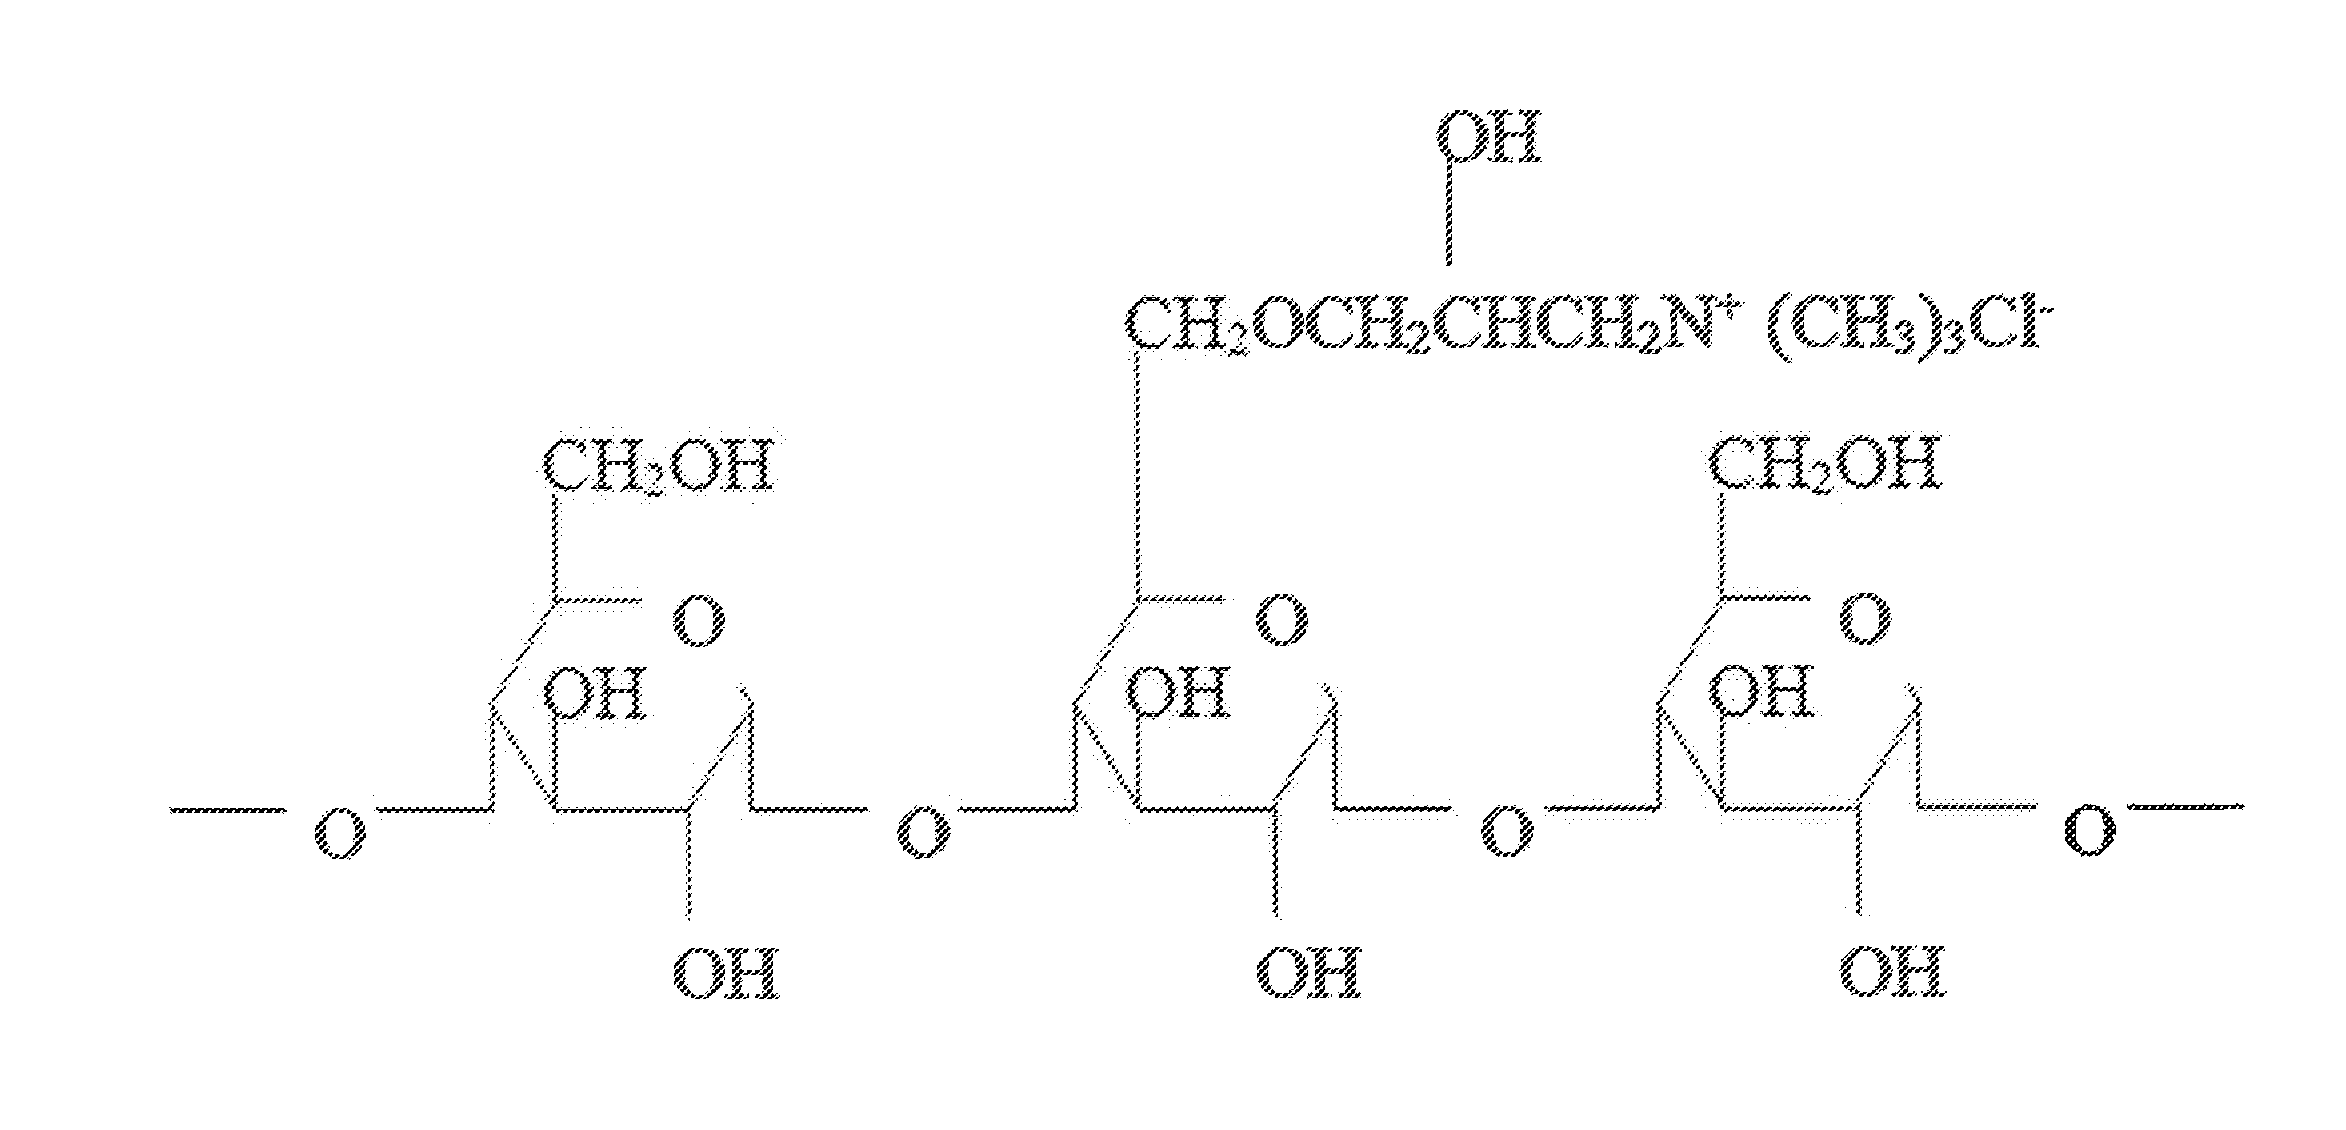 Composition and processfor removing impurities from a circulating water system